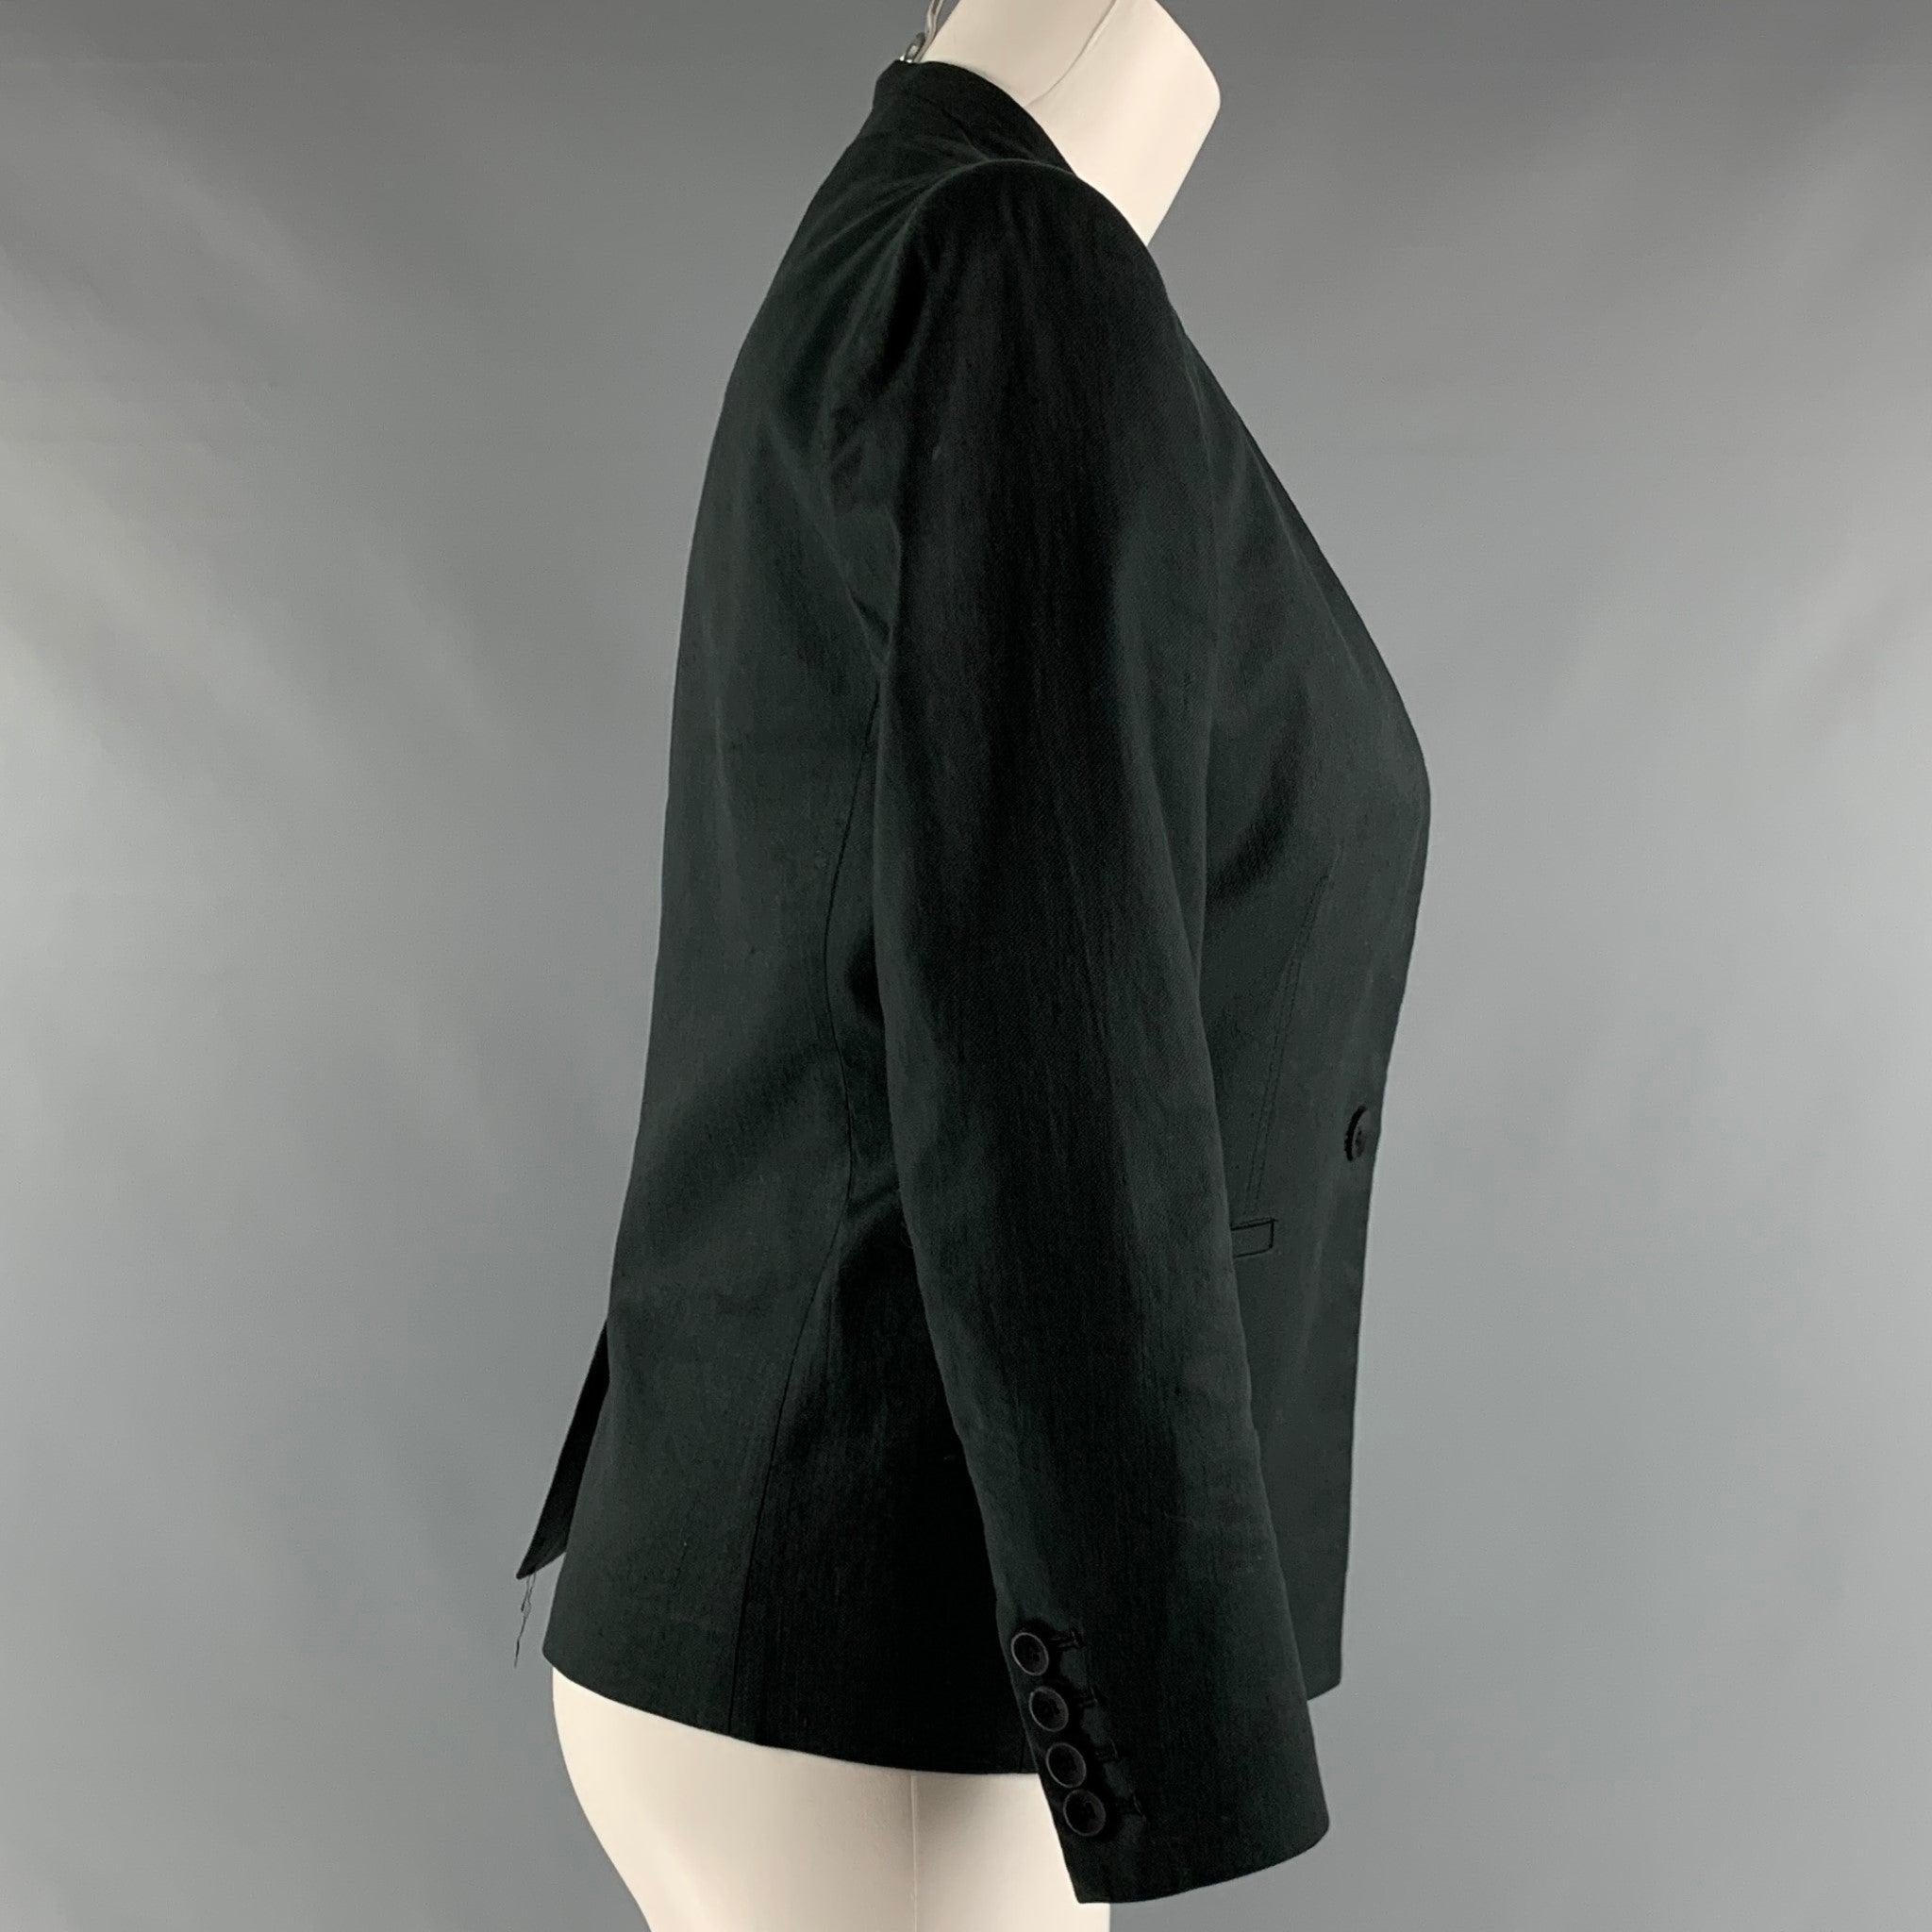 HELMUT LANG blazer comes in grey cotton blend twill material with a deep V neck, single breasted button front, and welt pockets. Excellent Pre-Owned Condition. 

Marked:   2 

Measurements: 
 
Shoulder: 15 inches Bust: 36 inches Sleeve: 20.5 inches